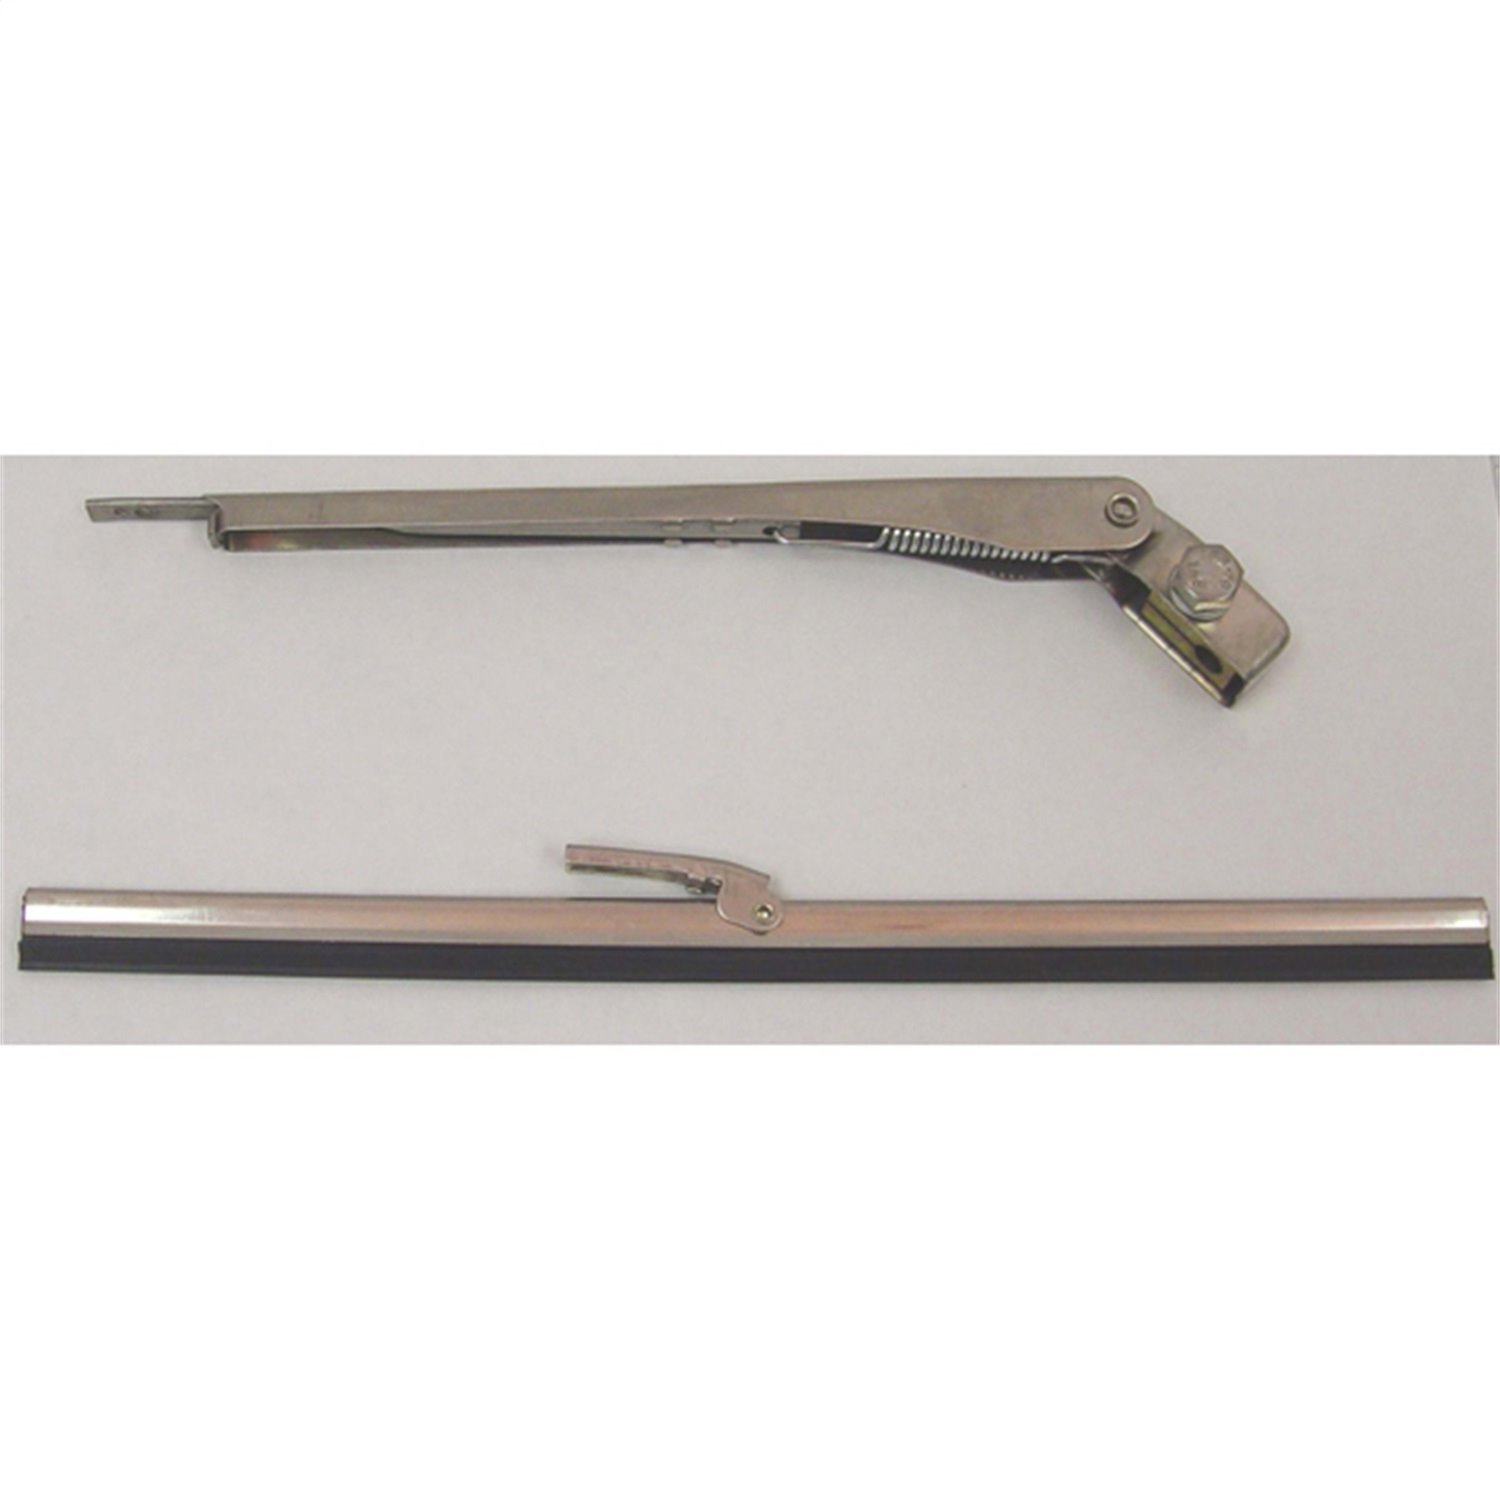 This stainless steel electric windshield wiper arm and